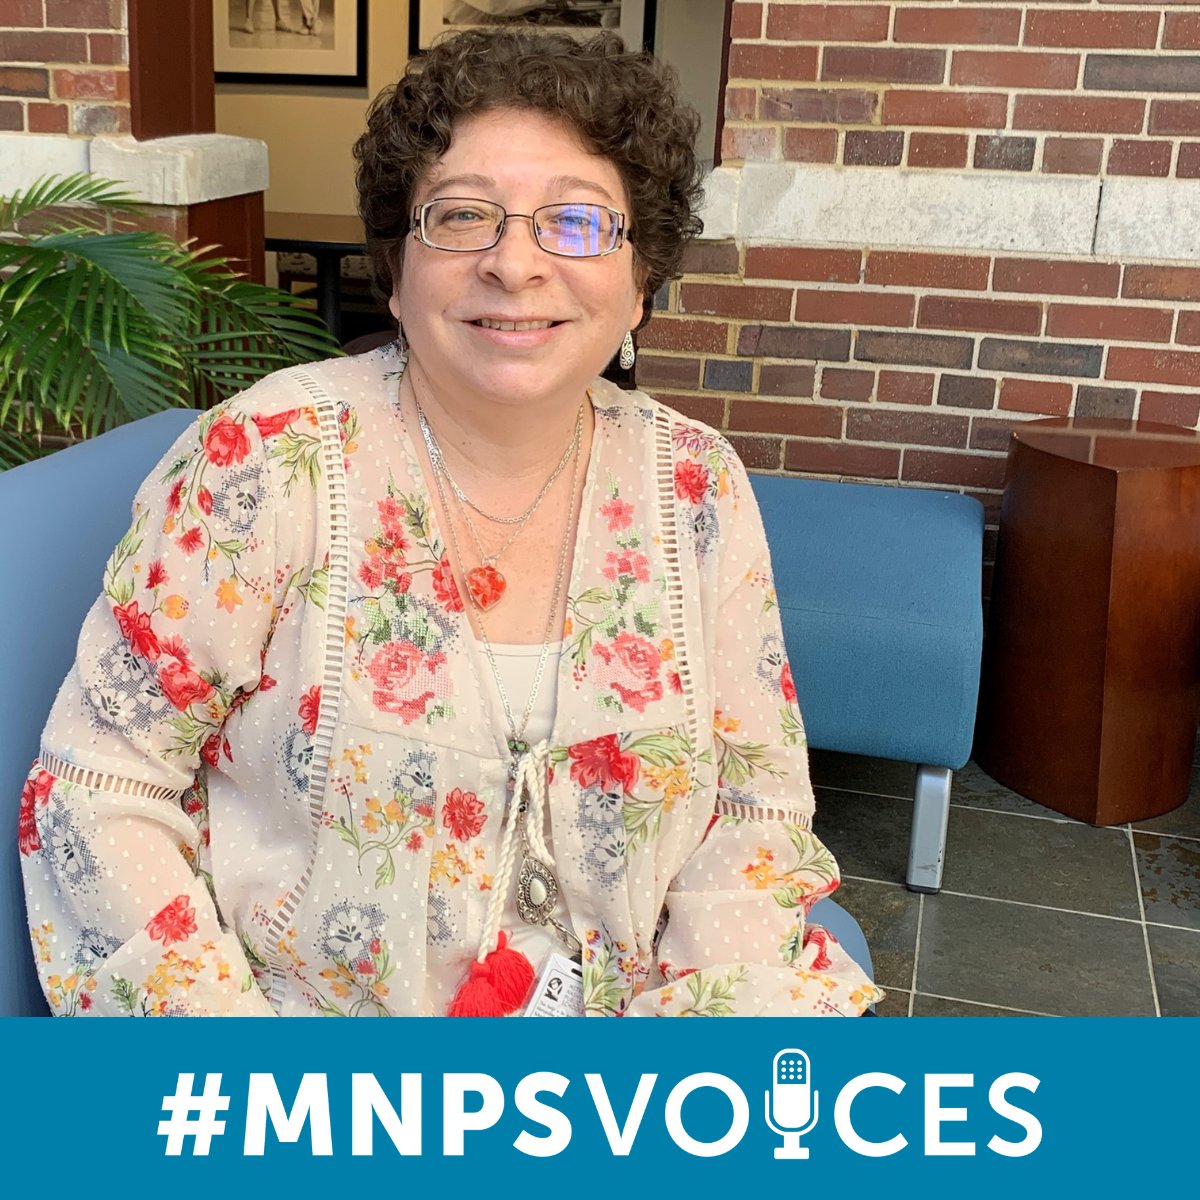 Maria Heerdt, an MNPS Family Engagement Specialist with @CommAchieves, is a long-time educator passionate about giving students and their families the tools to succeed.  #MNPSVoices mnps.org/news/featured-…